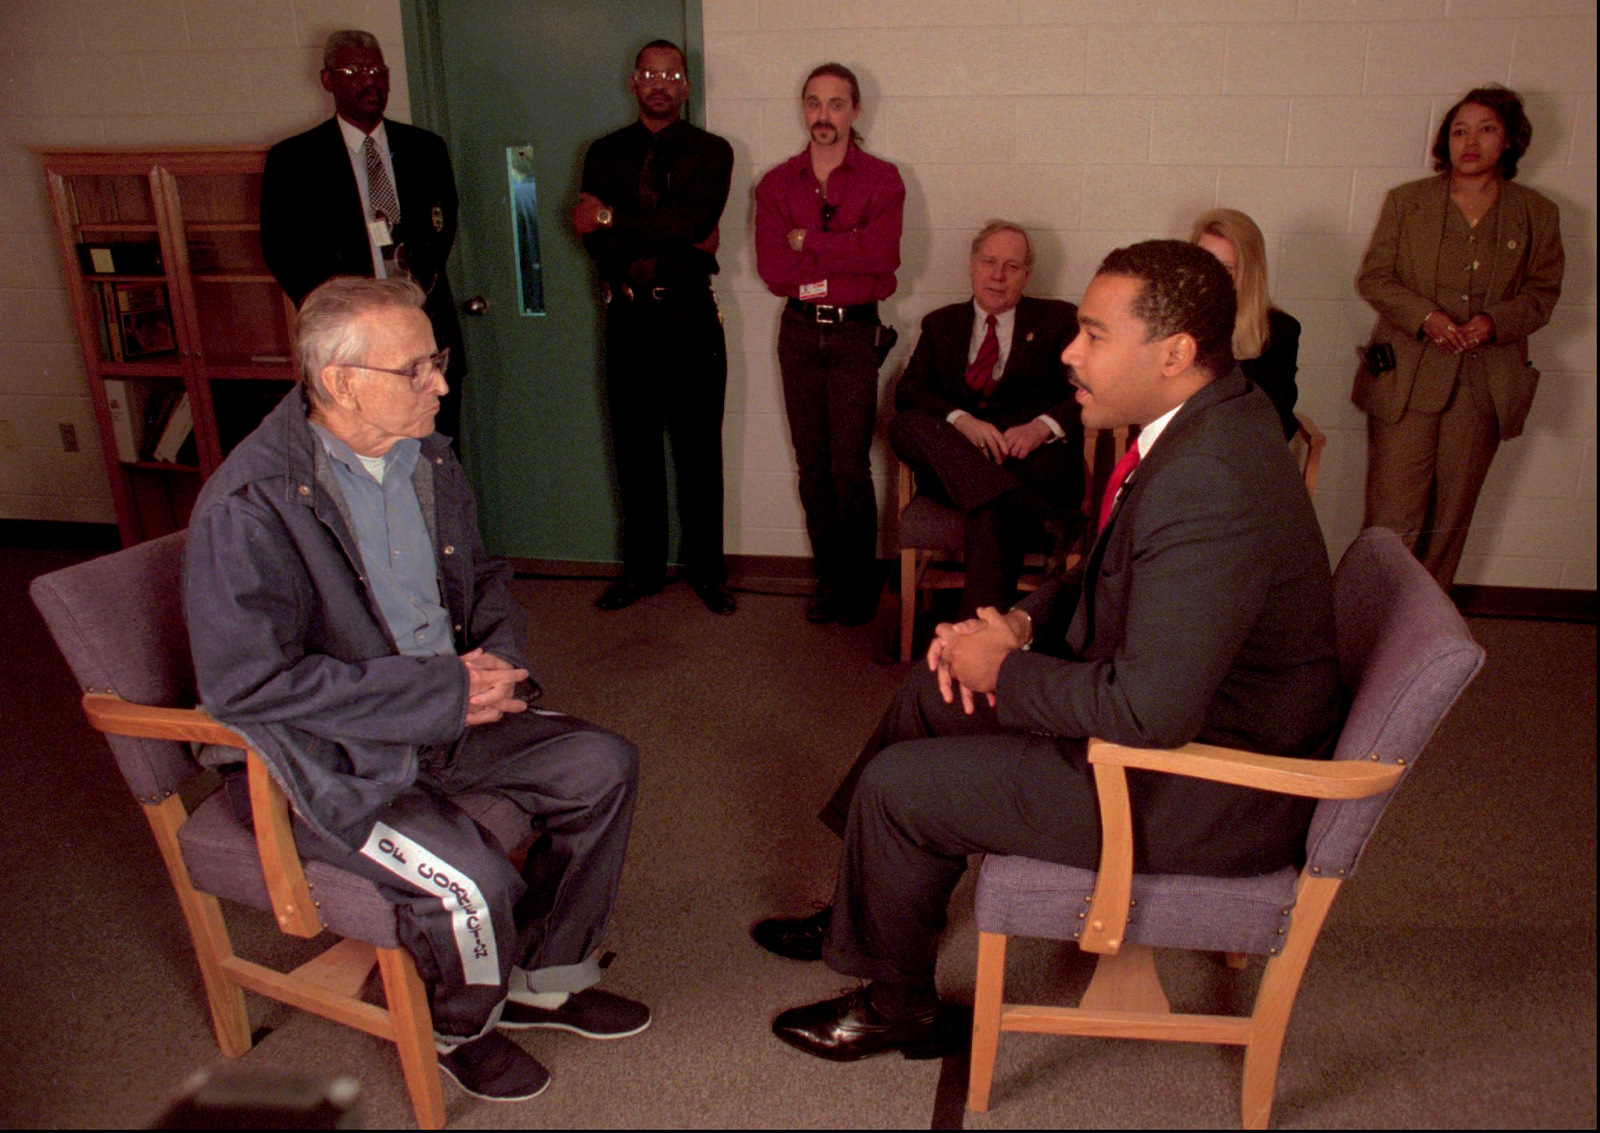 Dexter King, son of Martin Luther King Jr., meets with James Earl Ray, the man who confessed to killing King Sr. in 1969, in Nashville, Tenn., on March 27, 1997. During their meeting in a prison conference room, Ray denied killing King Sr. and Dexter King replied, "I believe you and my family believes you." (AP/Earl Warren/State of Tennessee)